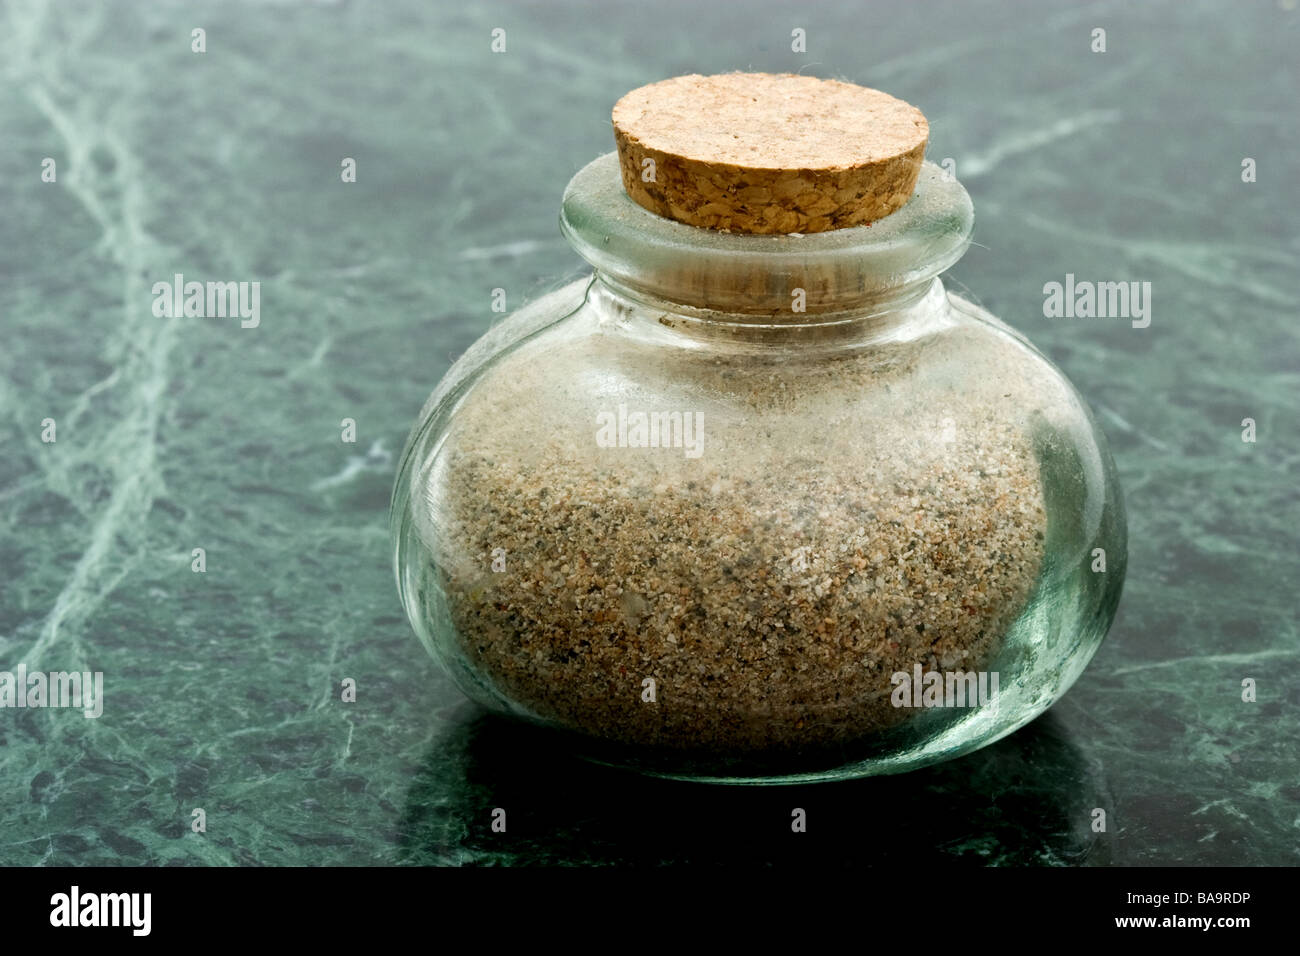 Small glass jar filled with sand with a cork stopper Stock Photo